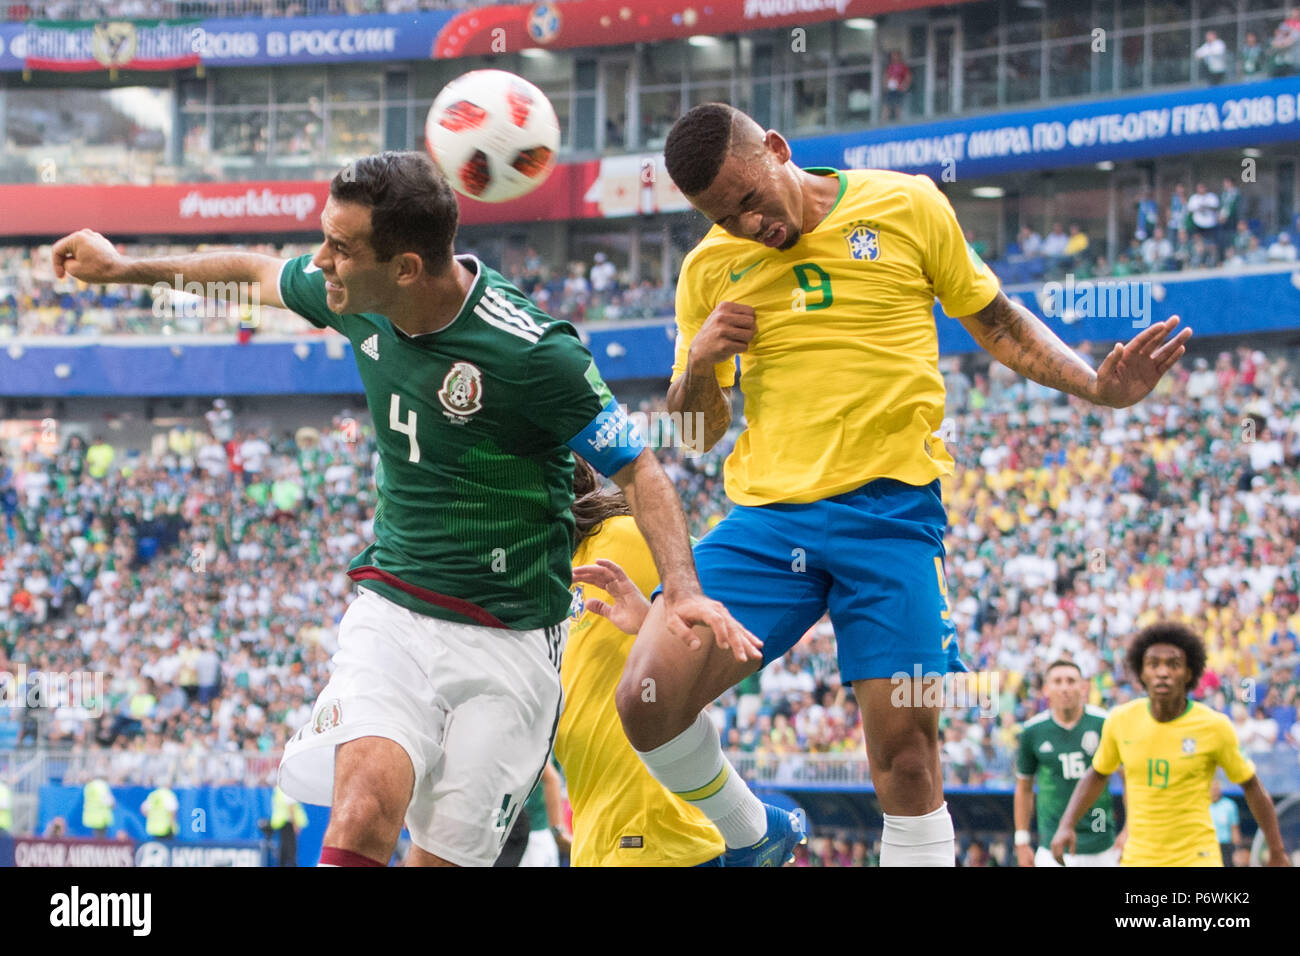 Rafael MARQUEZ (left, MEX) versus GABRIEL JESUS (BRA), action, duels, header, brazil (BRA) - Mexico (RUS) 2: 0, knockout round, match 53, on 02.07.2018 in Samara; Football World Cup 2018 in Russia from 14.06. - 15.07.2018. | usage worldwide Stock Photo